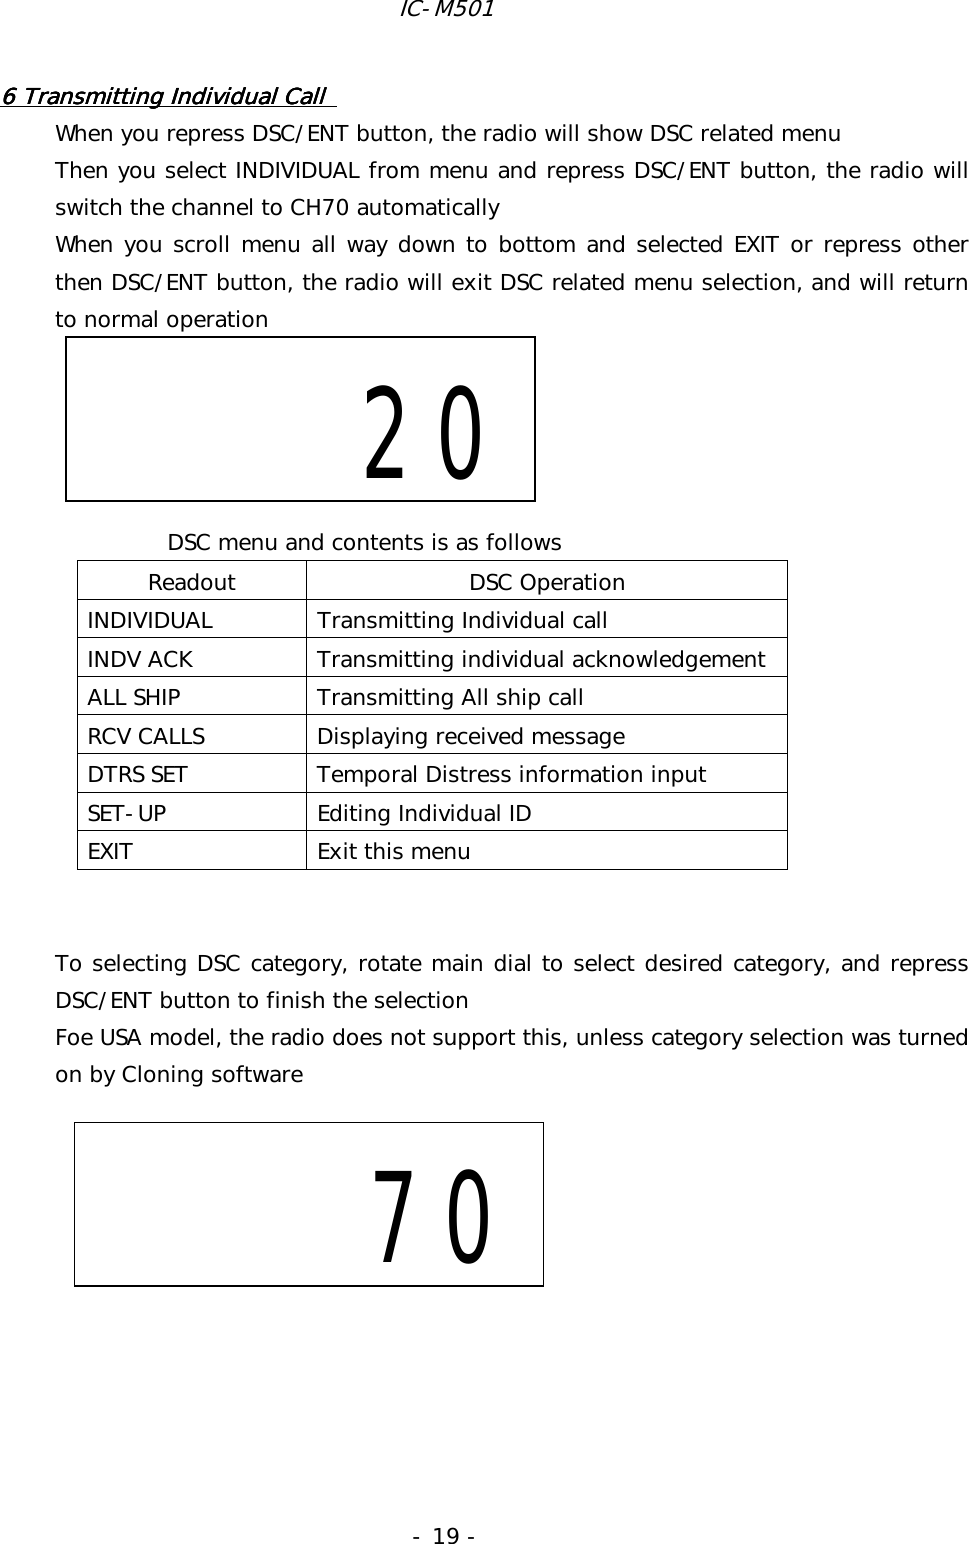 IC-M501 - 19 - 6 Transmitting Individual Call 6 Transmitting Individual Call 6 Transmitting Individual Call 6 Transmitting Individual Call      When you repress DSC/ENT button, the radio will show DSC related menu Then you select INDIVIDUAL from menu and repress DSC/ENT button, the radio will switch the channel to CH70 automatically When you scroll menu all way down to bottom and selected EXIT or repress other then DSC/ENT button, the radio will exit DSC related menu selection, and will return to normal operation       Readout DSC Operation INDIVIDUAL  Transmitting Individual call INDV ACK  Transmitting individual acknowledgement ALL SHIP  Transmitting All ship call RCV CALLS  Displaying received message DTRS SET  Temporal Distress information input SET-UP  Editing Individual ID EXIT  Exit this menu   To selecting DSC category, rotate main dial to select desired category, and repress DSC/ENT button to finish the selection Foe USA model, the radio does not support this, unless category selection was turned on by Cloning software               70         20DSC menu and contents is as follows 